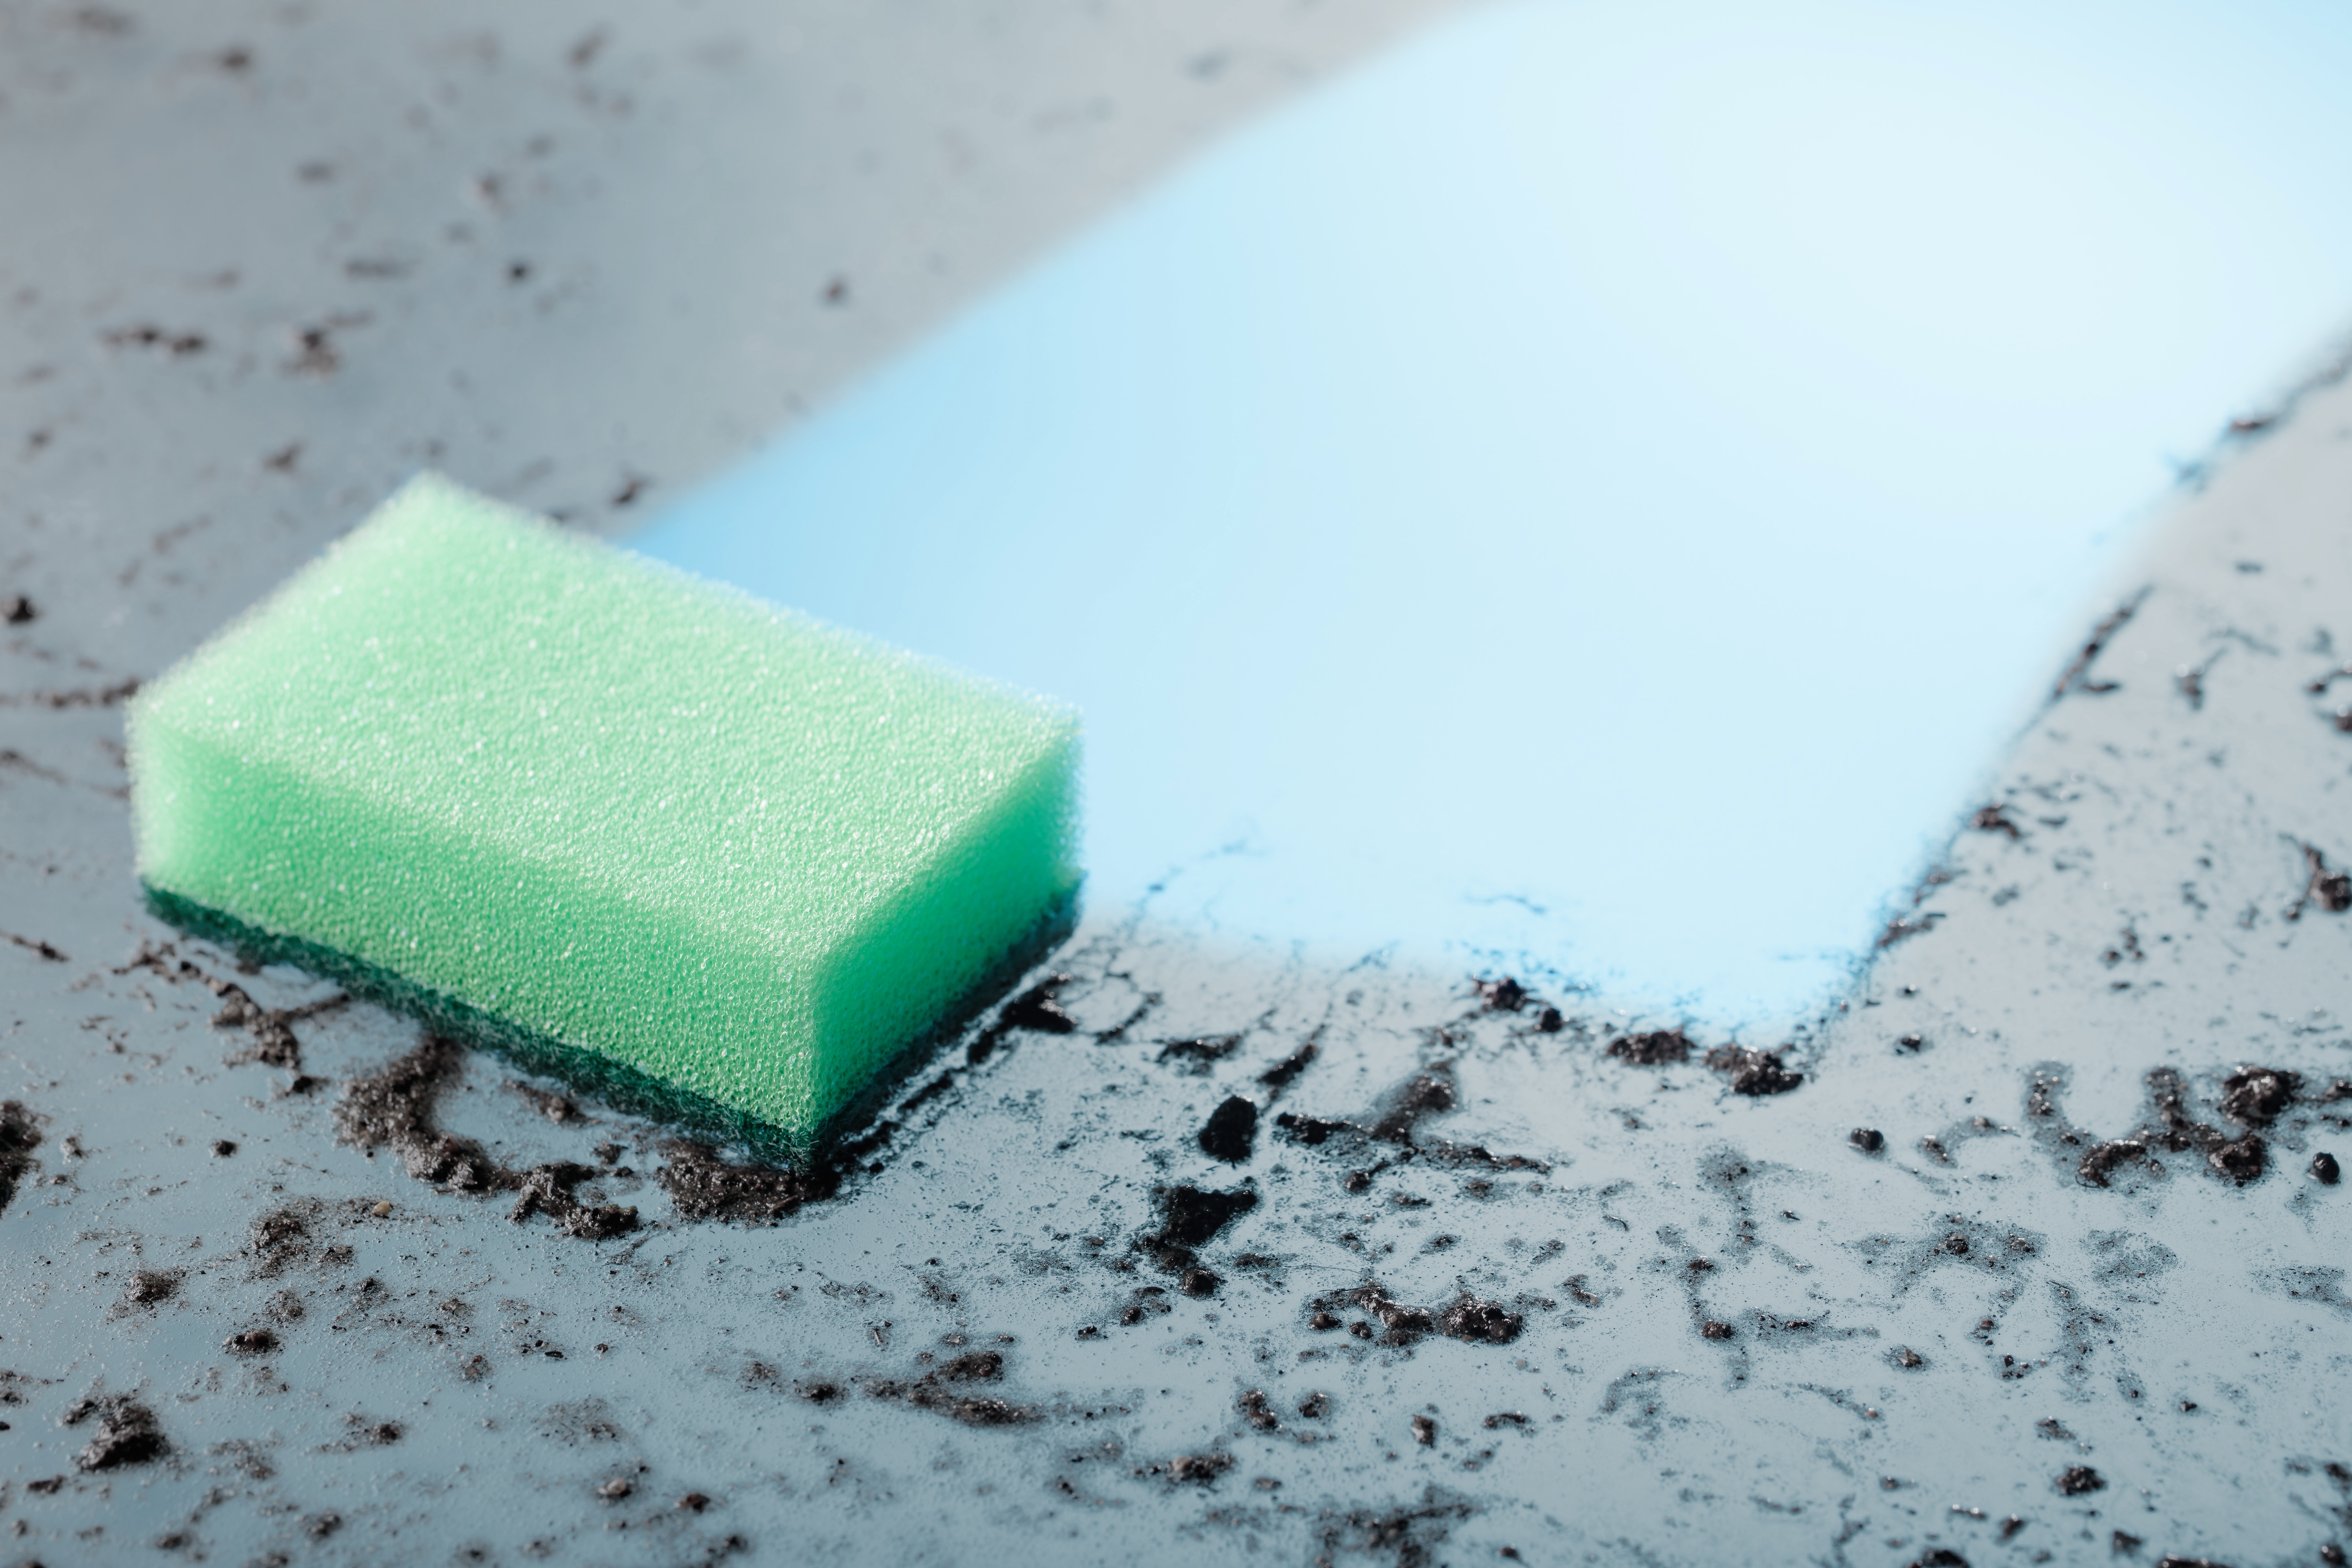 What does self-cleaning mean?